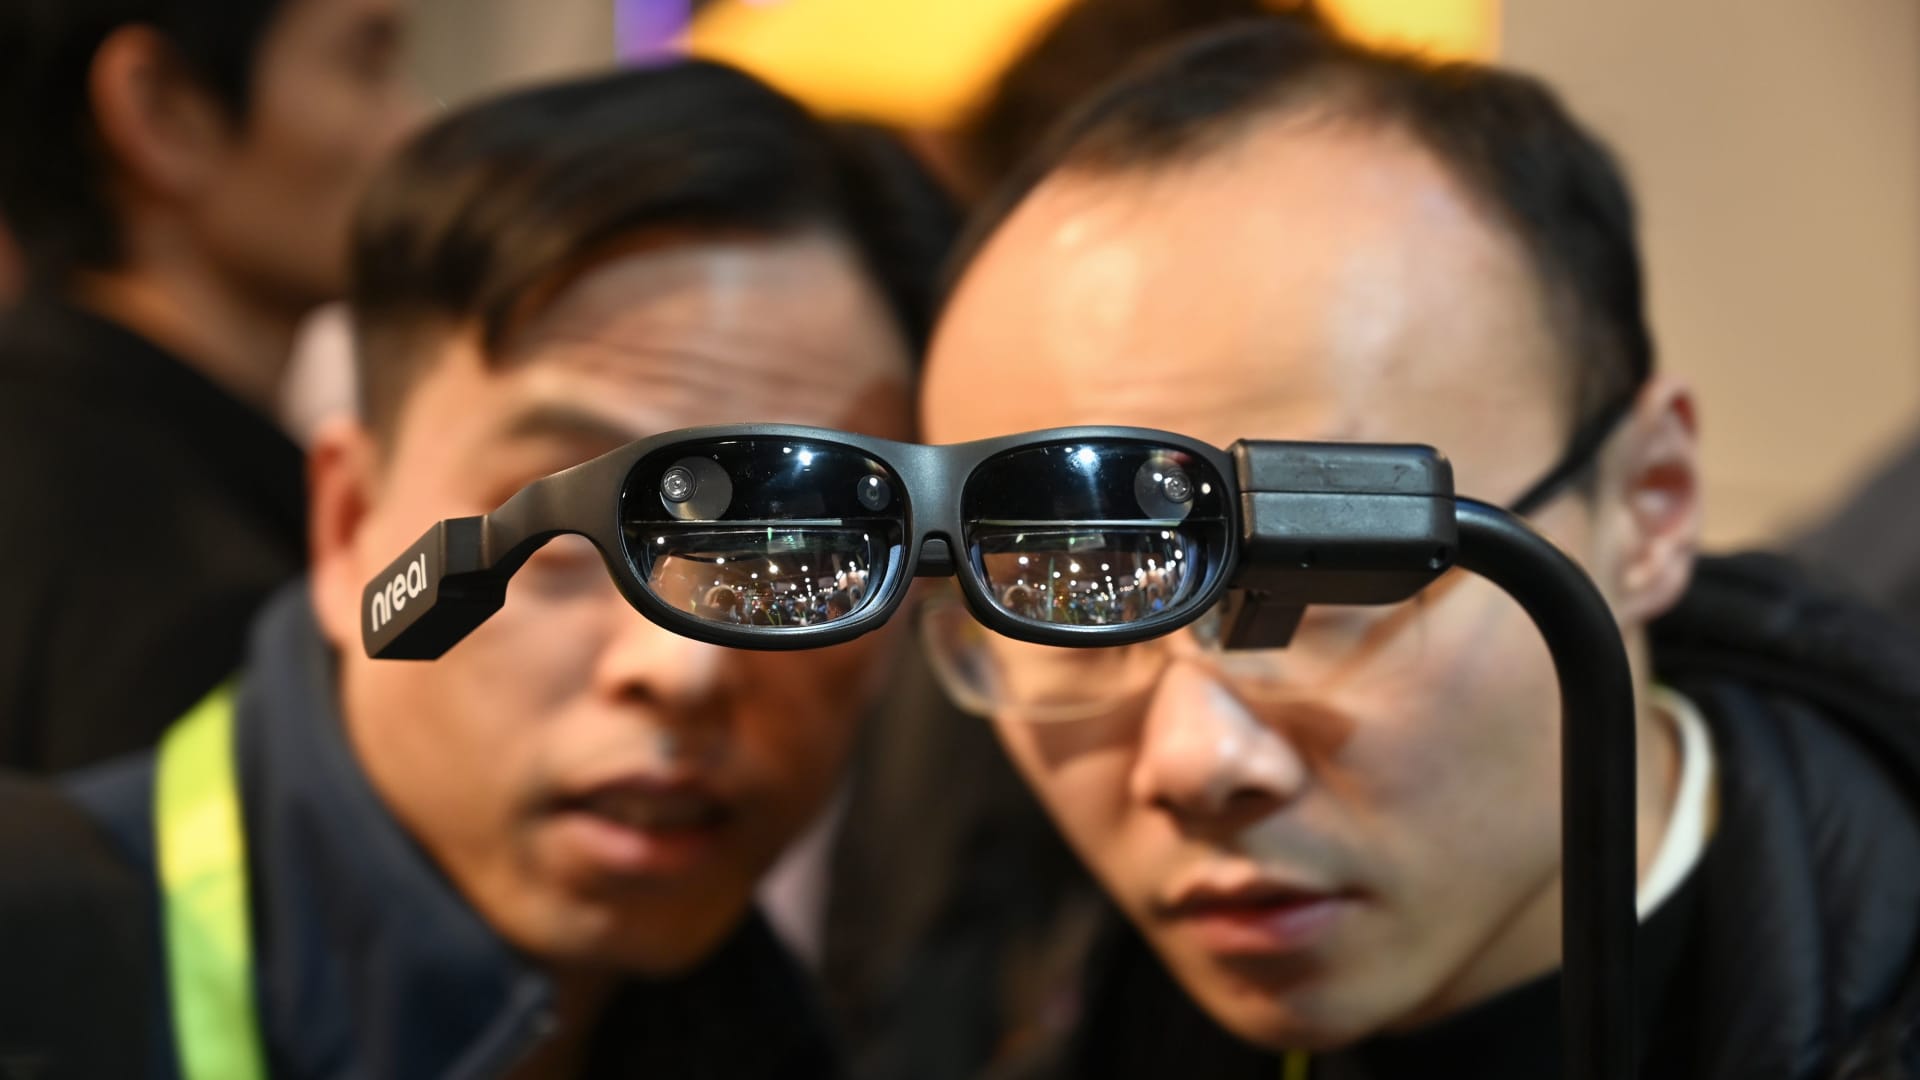 Chinese start-up Nreal is launching its augmented reality glasses in the UK this spring – Om Shree Infotech